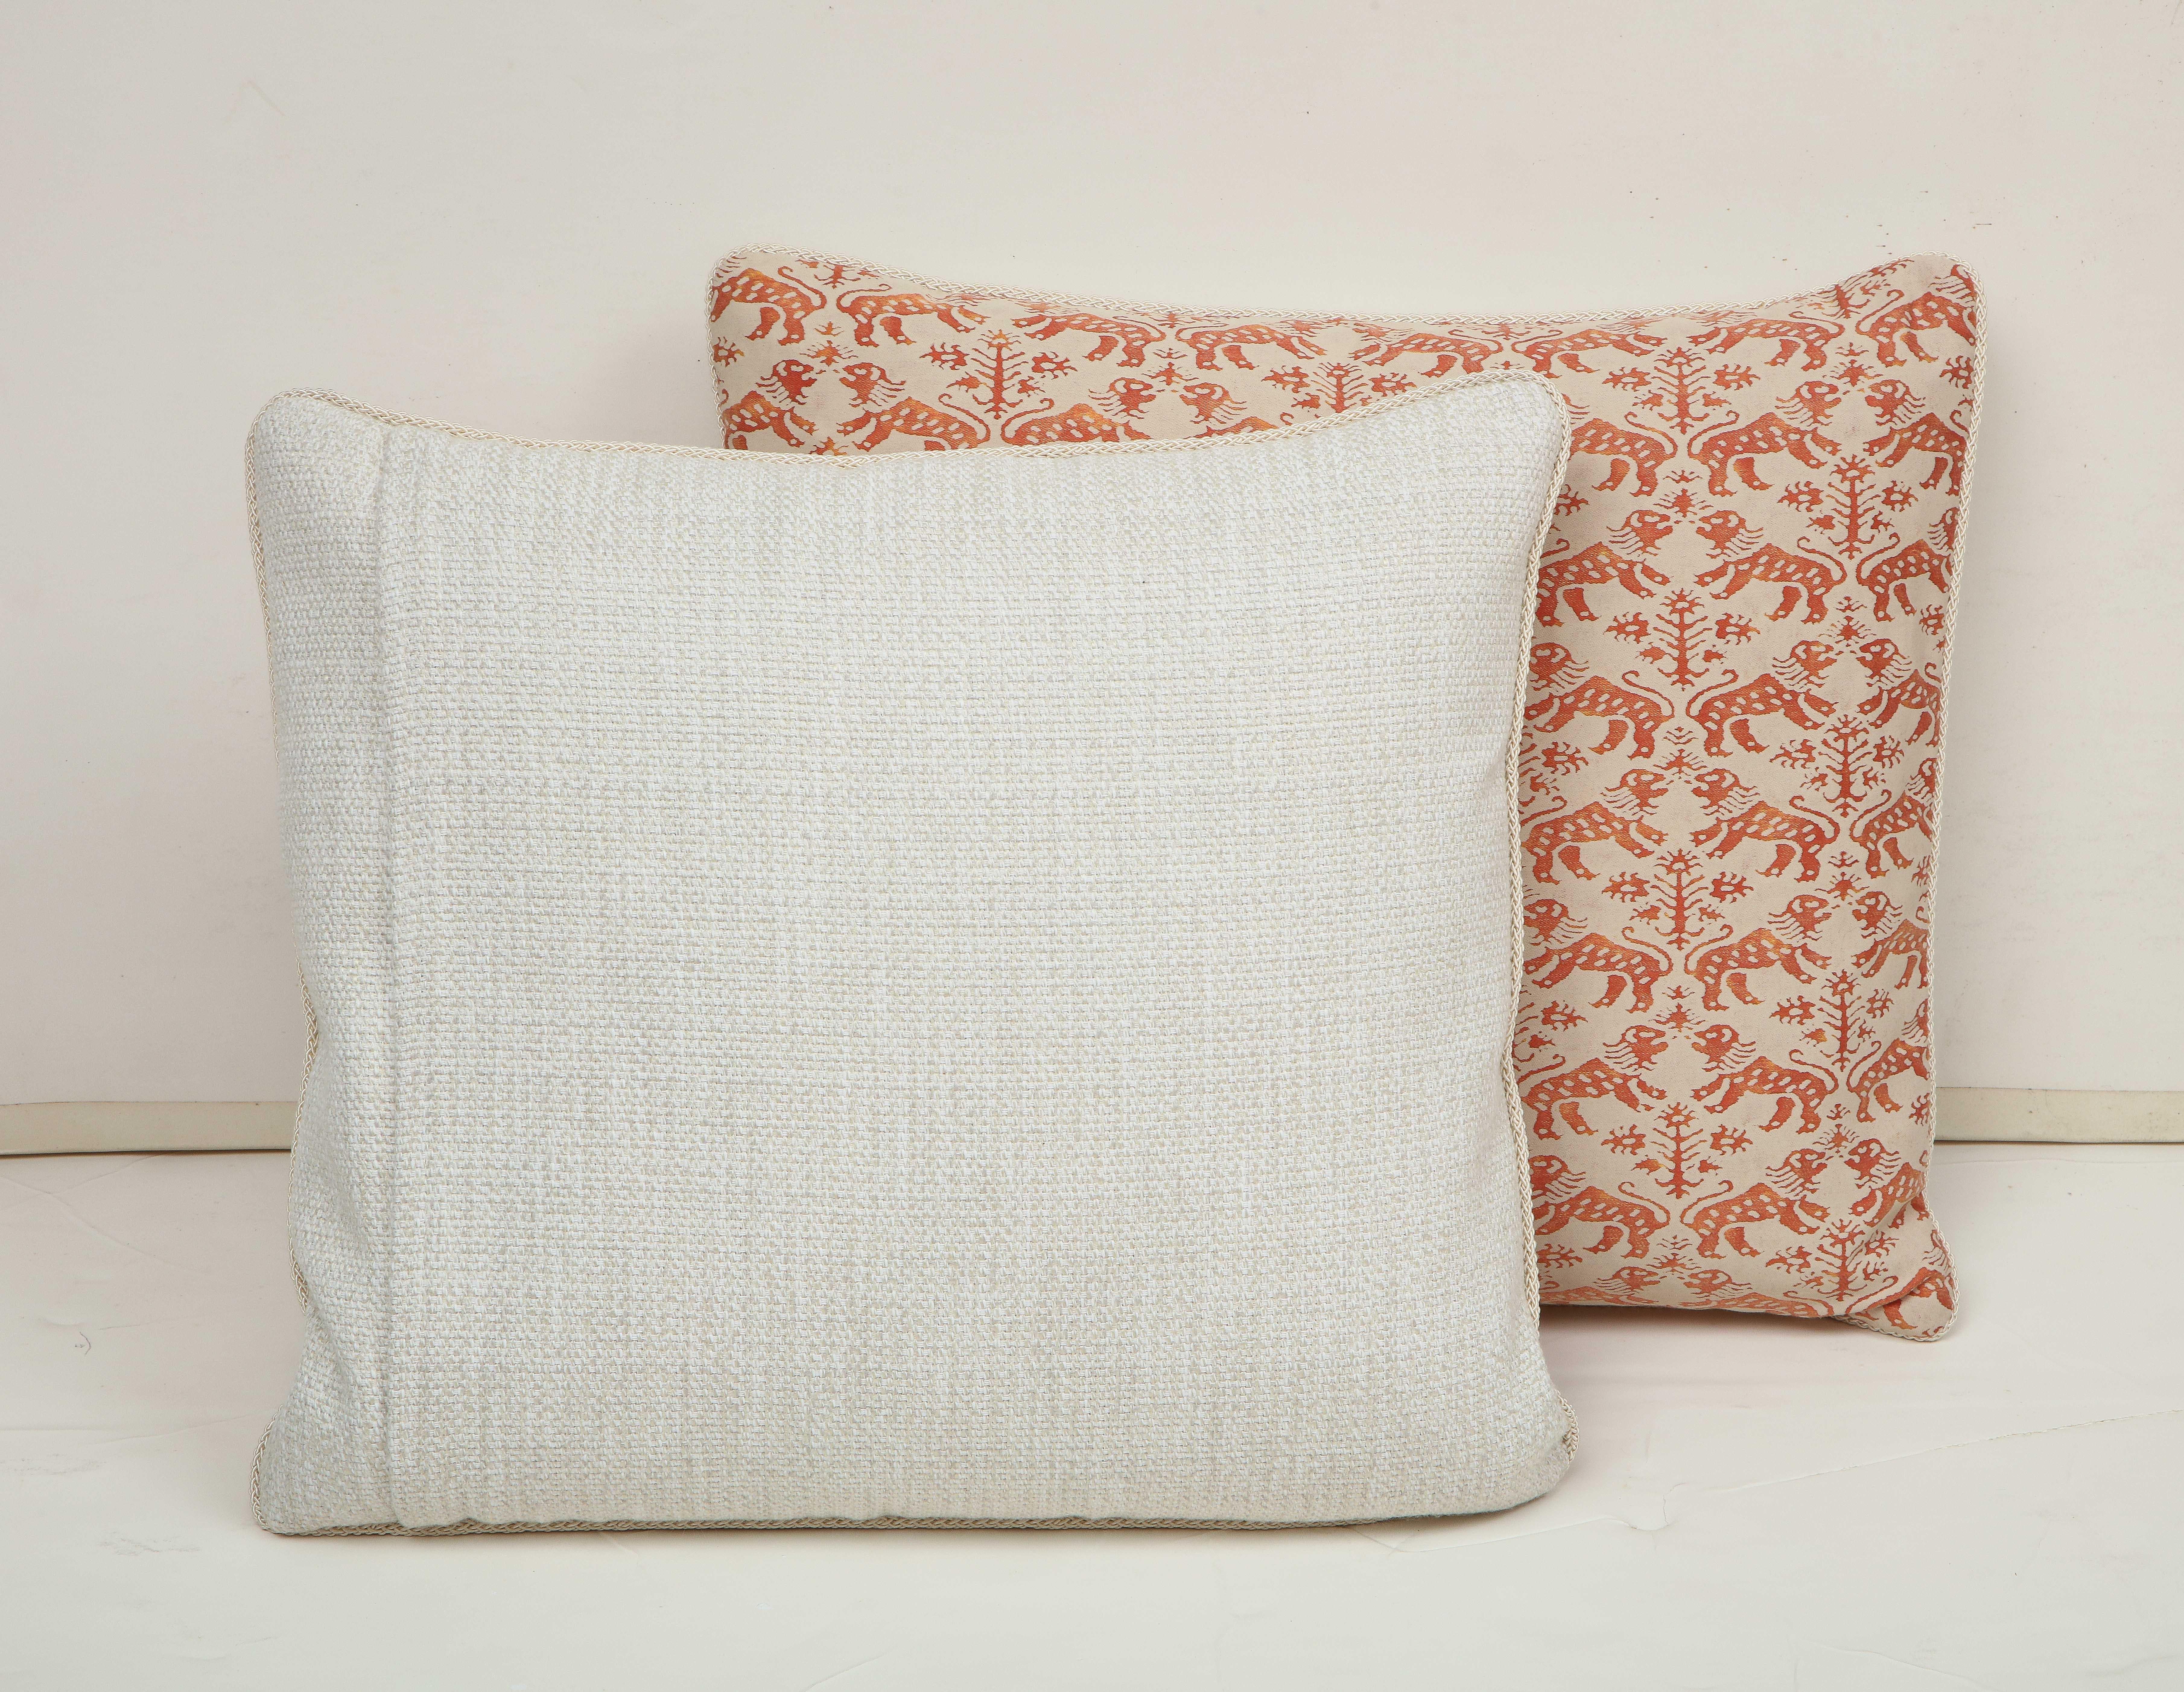 Contemporary Fortuny Pillow in Orange and Cream